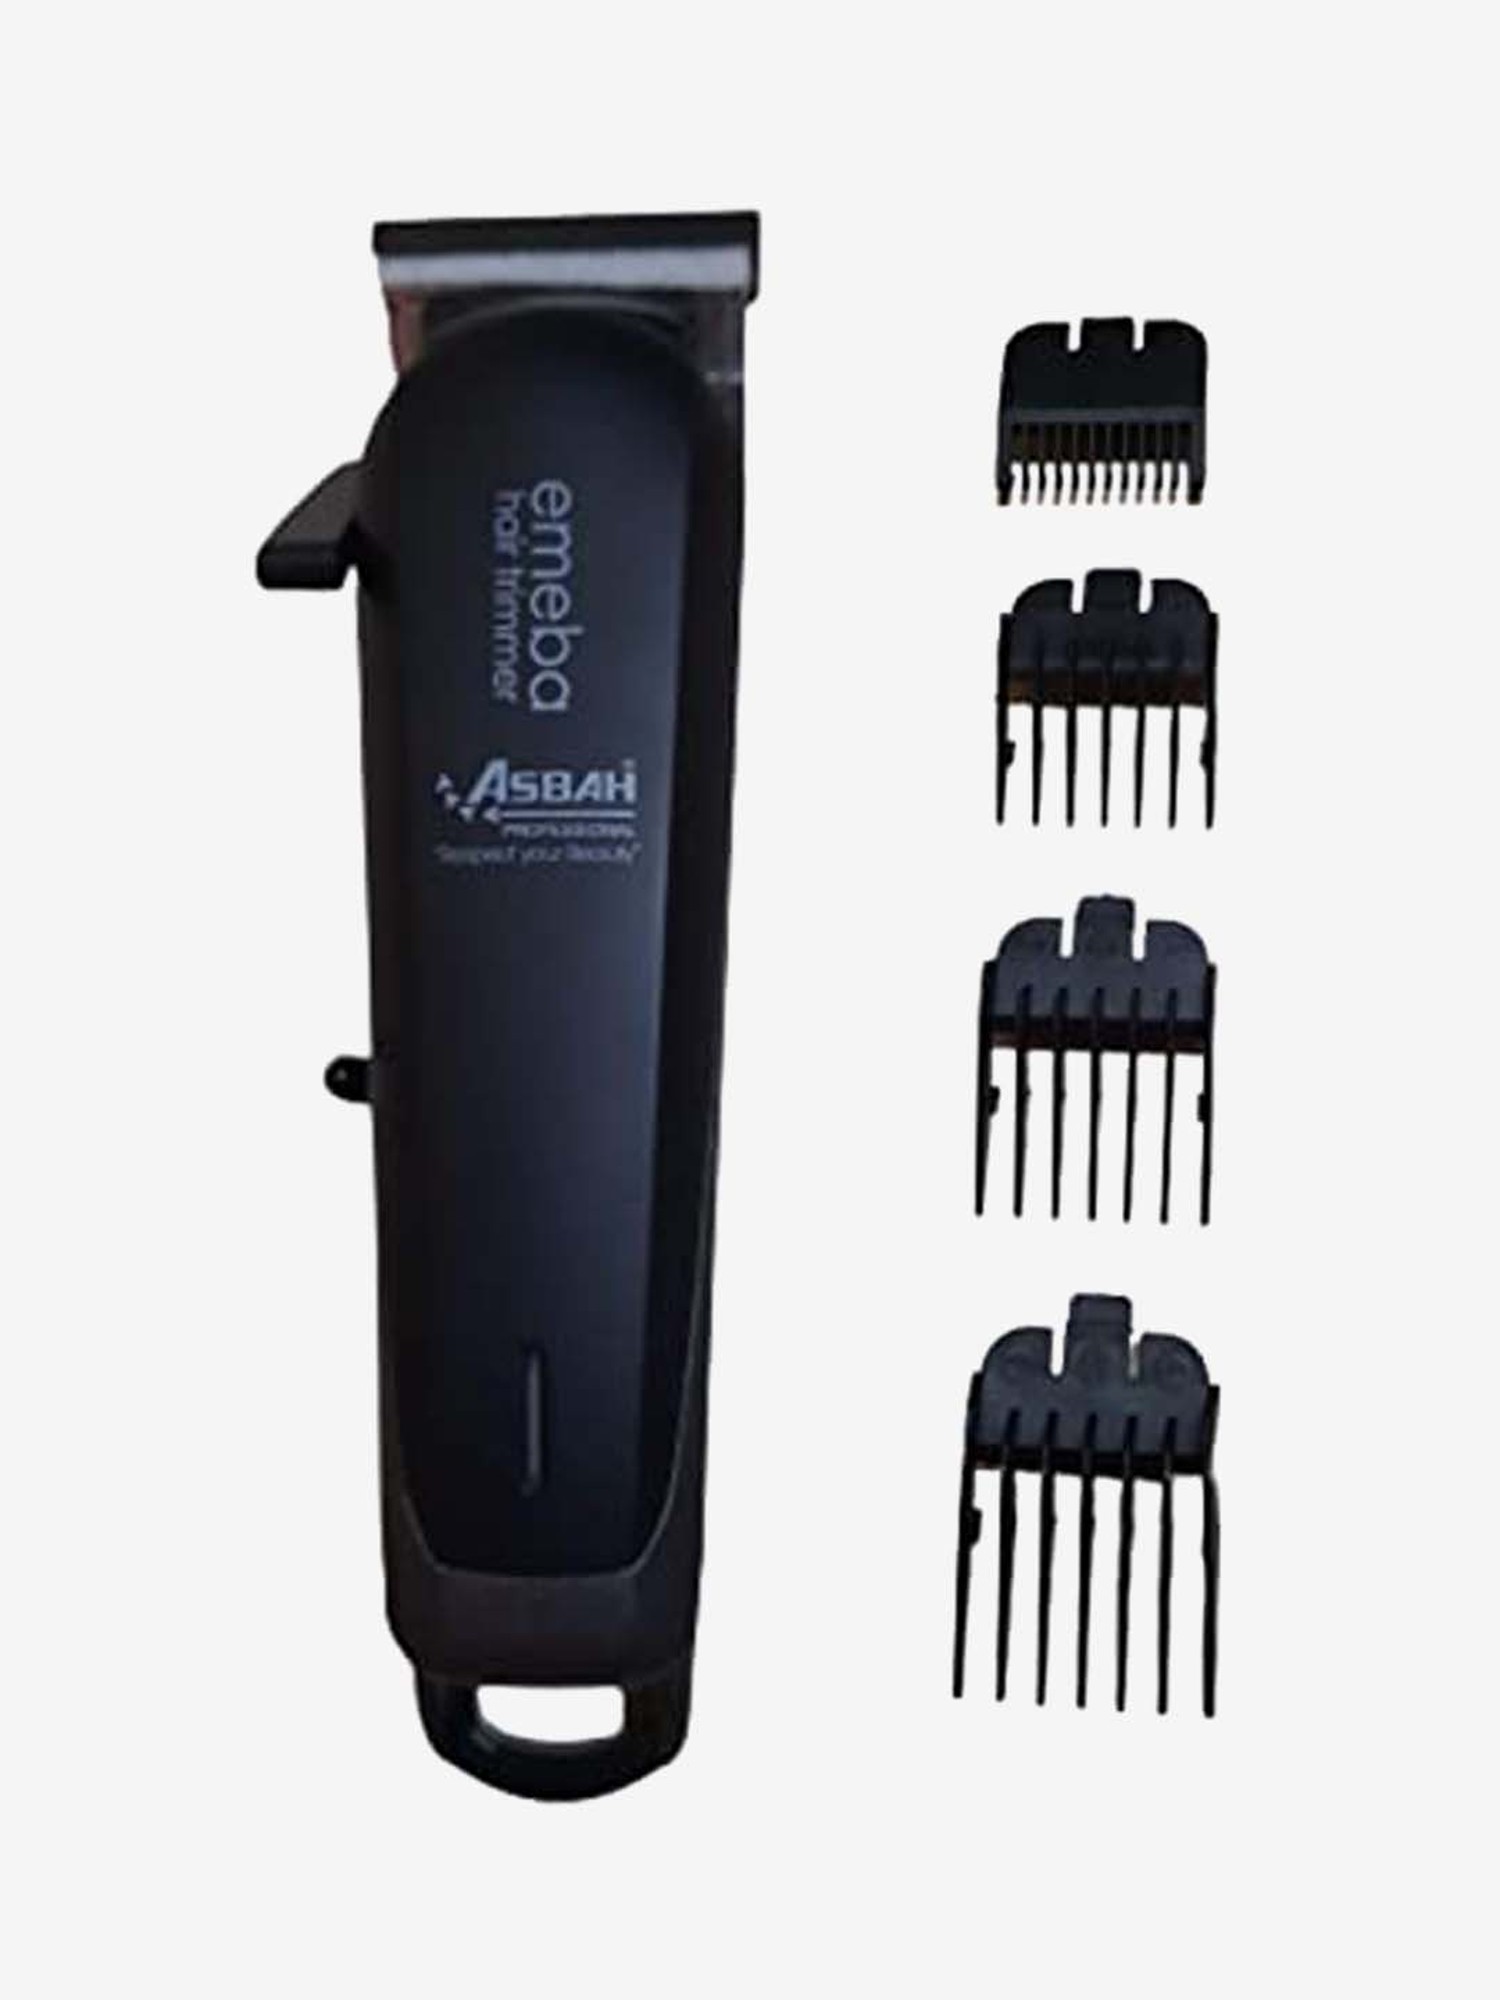 asbah trimmer charger